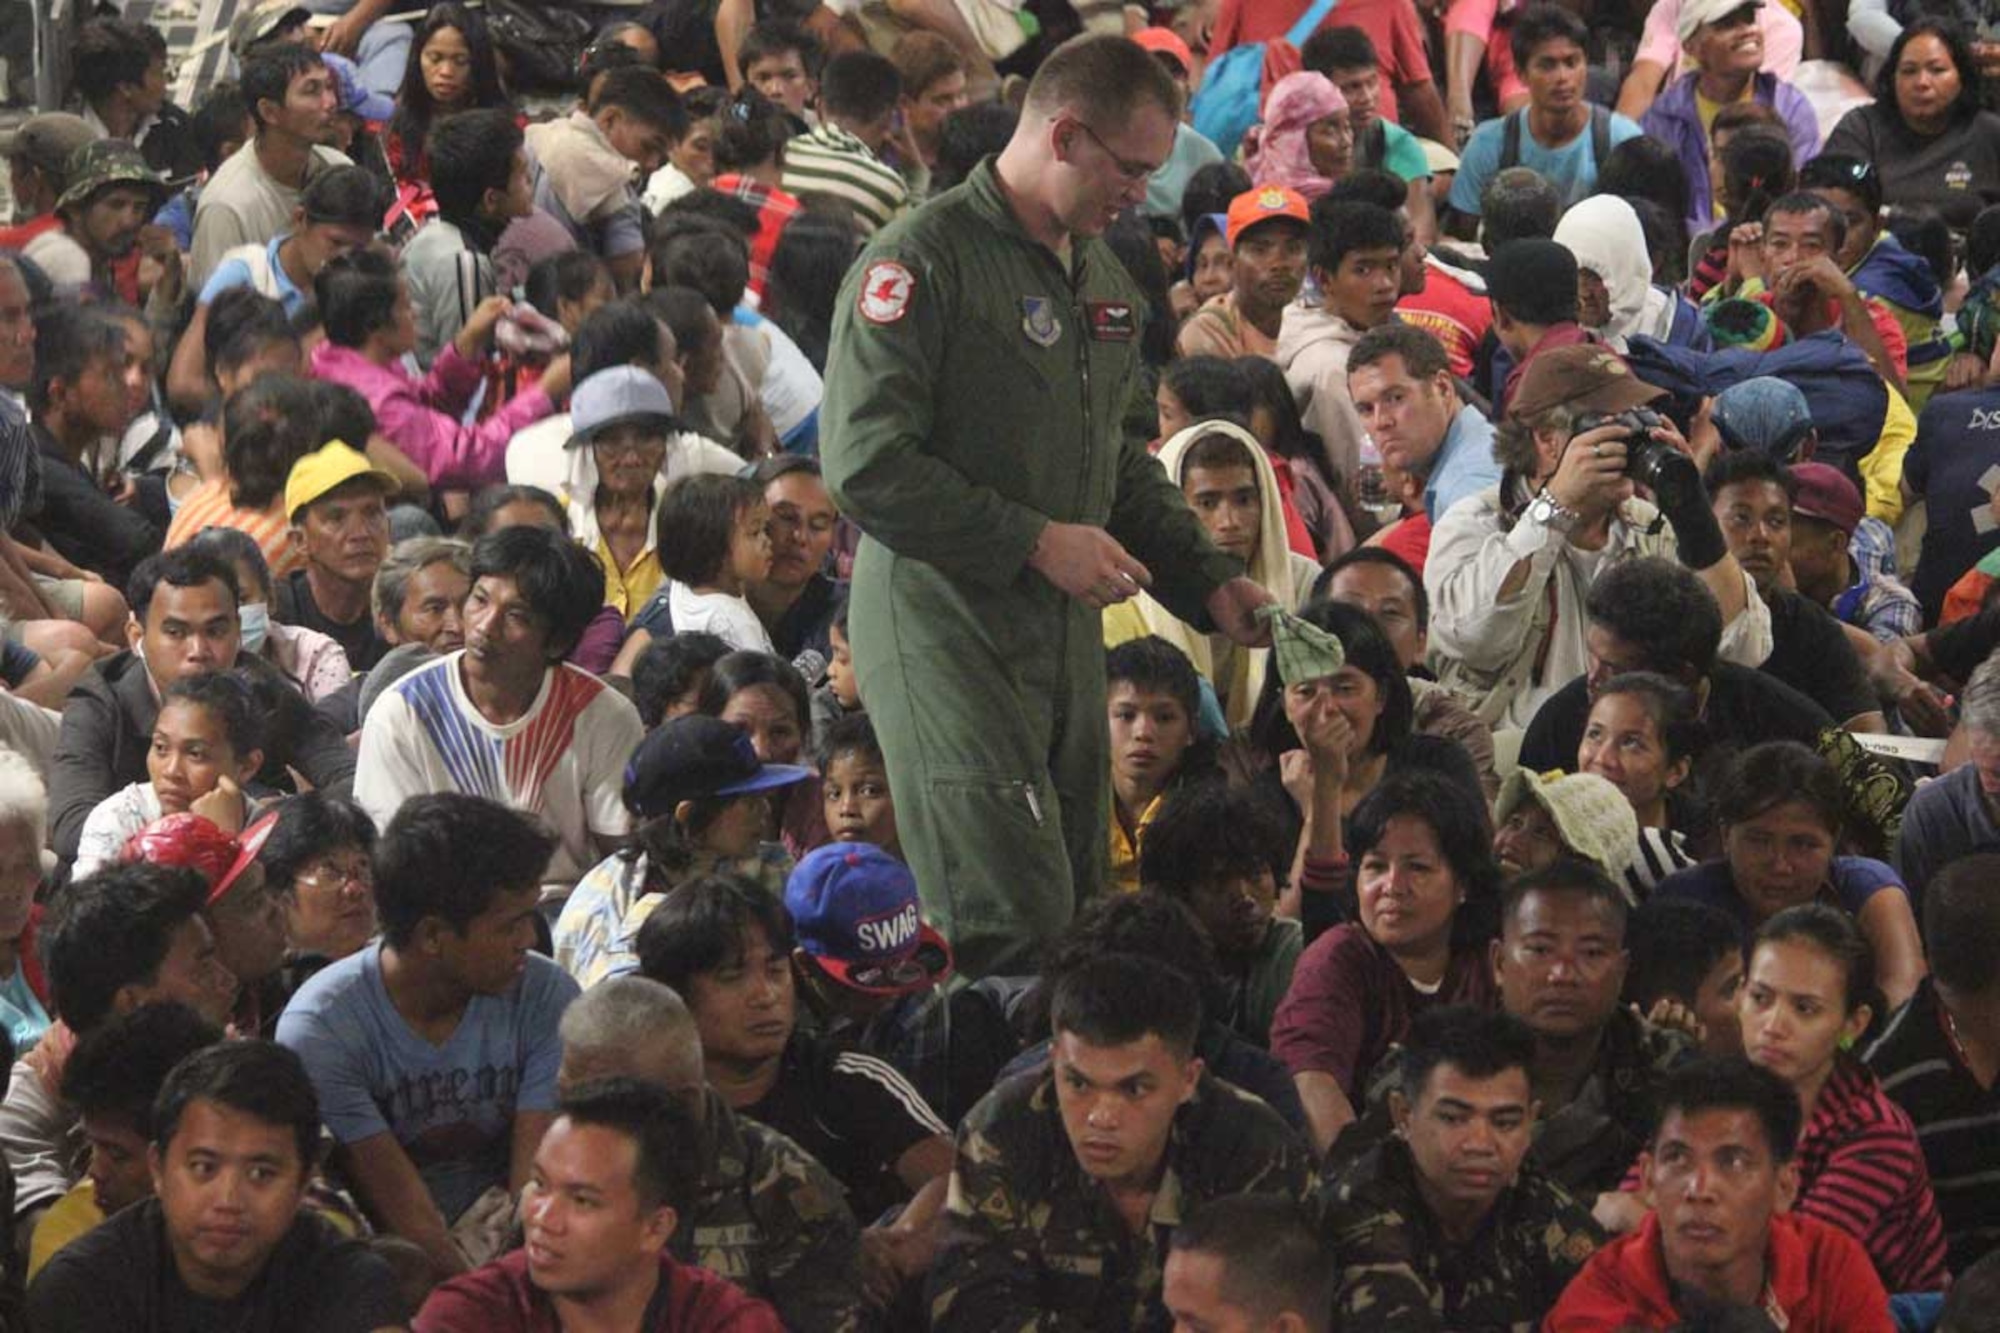 U.S. Air Force Staff Sgt. Neal Ylitalo, 517th Airlift Squadron C-17 Globemaster III loadmaster, walks through a large group of evacuees during Operation Damayan, Nov. 21. Operation Damayan is a humanitarian aid and disaster relief operation led by the Philippine government and supported by a multinational response force. The evacuee transportation process was overseen by a joint service operation and the Armed Forces of the Philippines. (Courtesy photo)